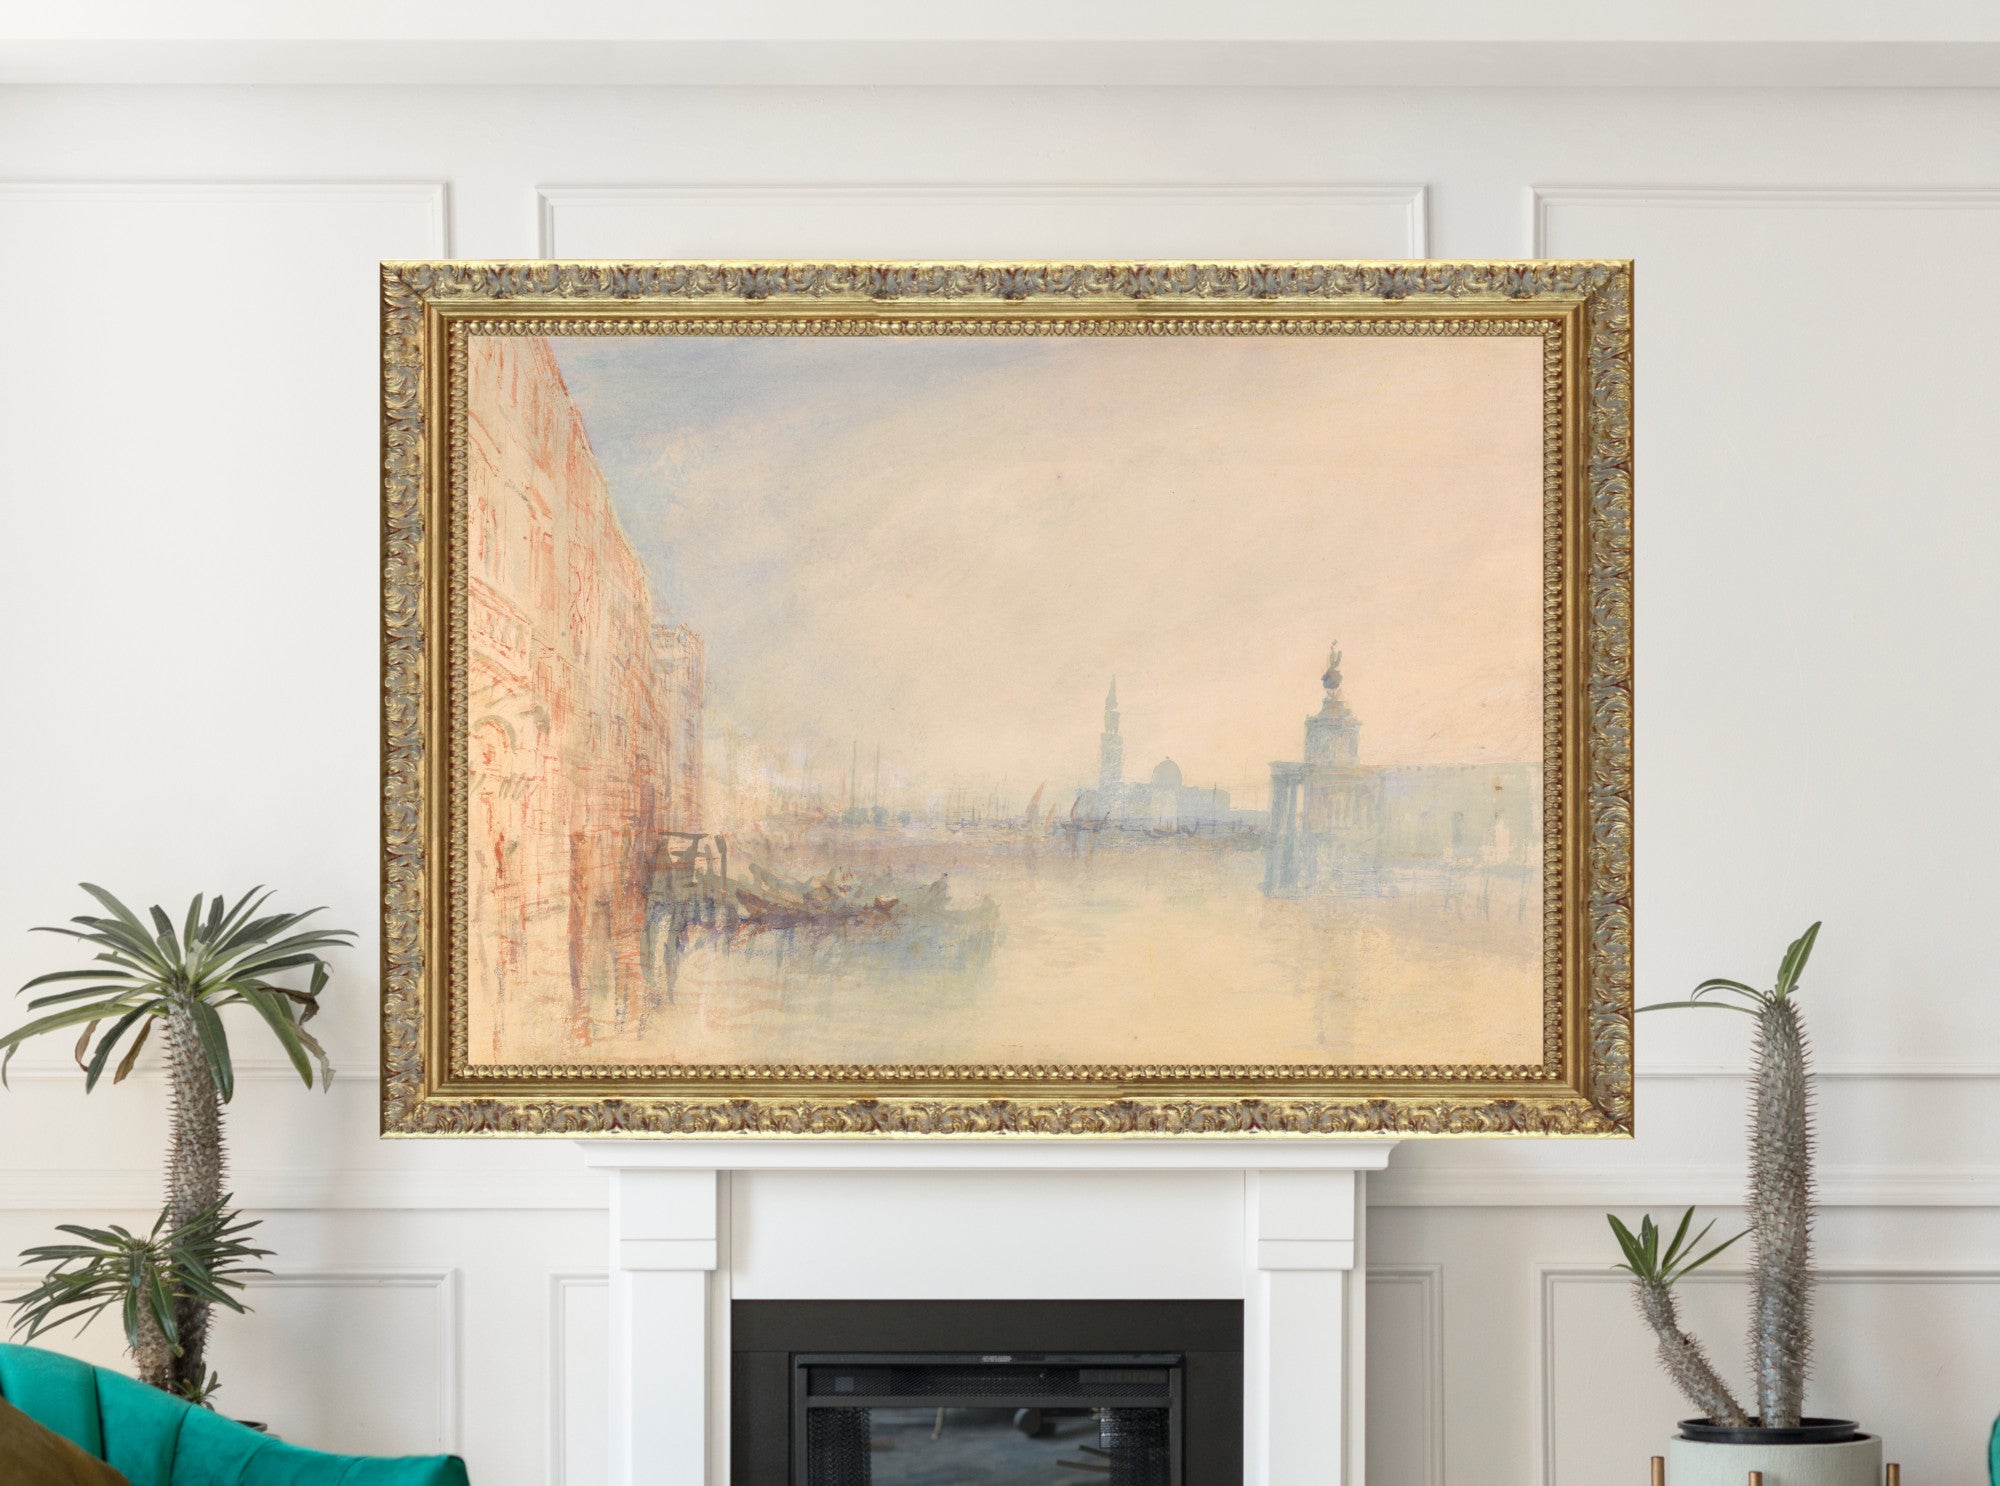 Venice, The Mouth of the Grand Canal by William Turner